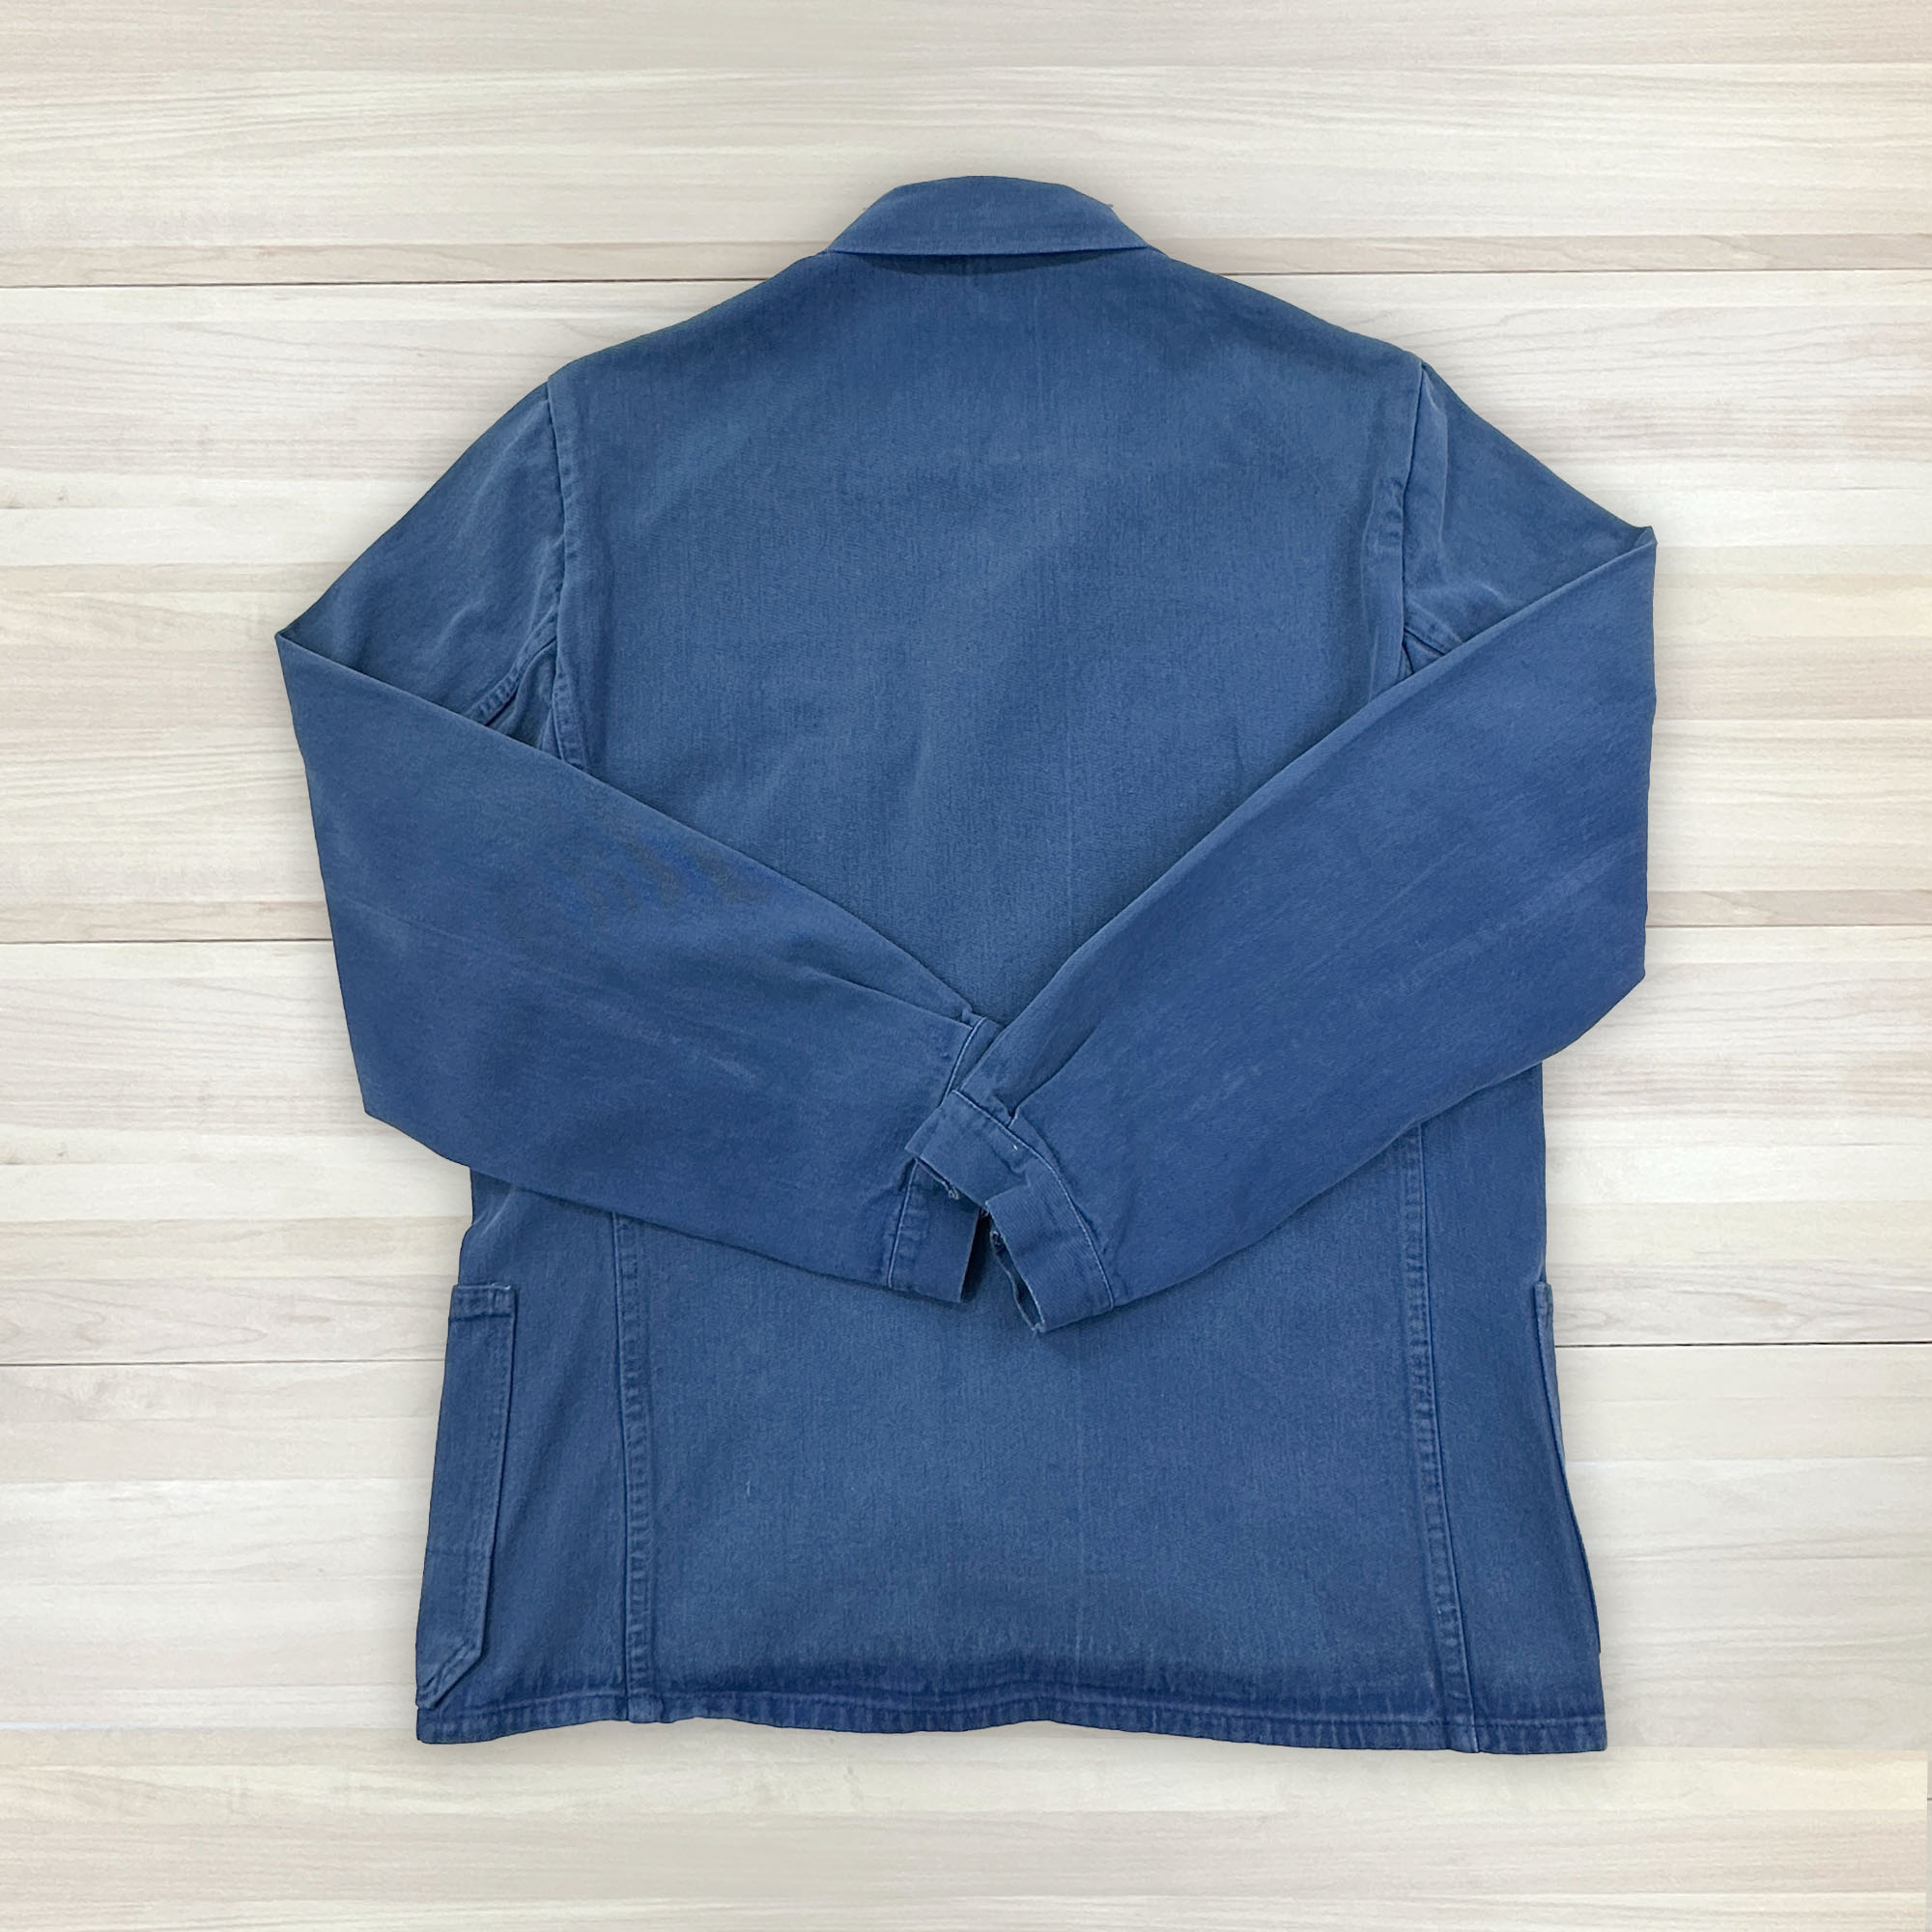 Vintage Blue French Chore Jacket - Women's Small - 0